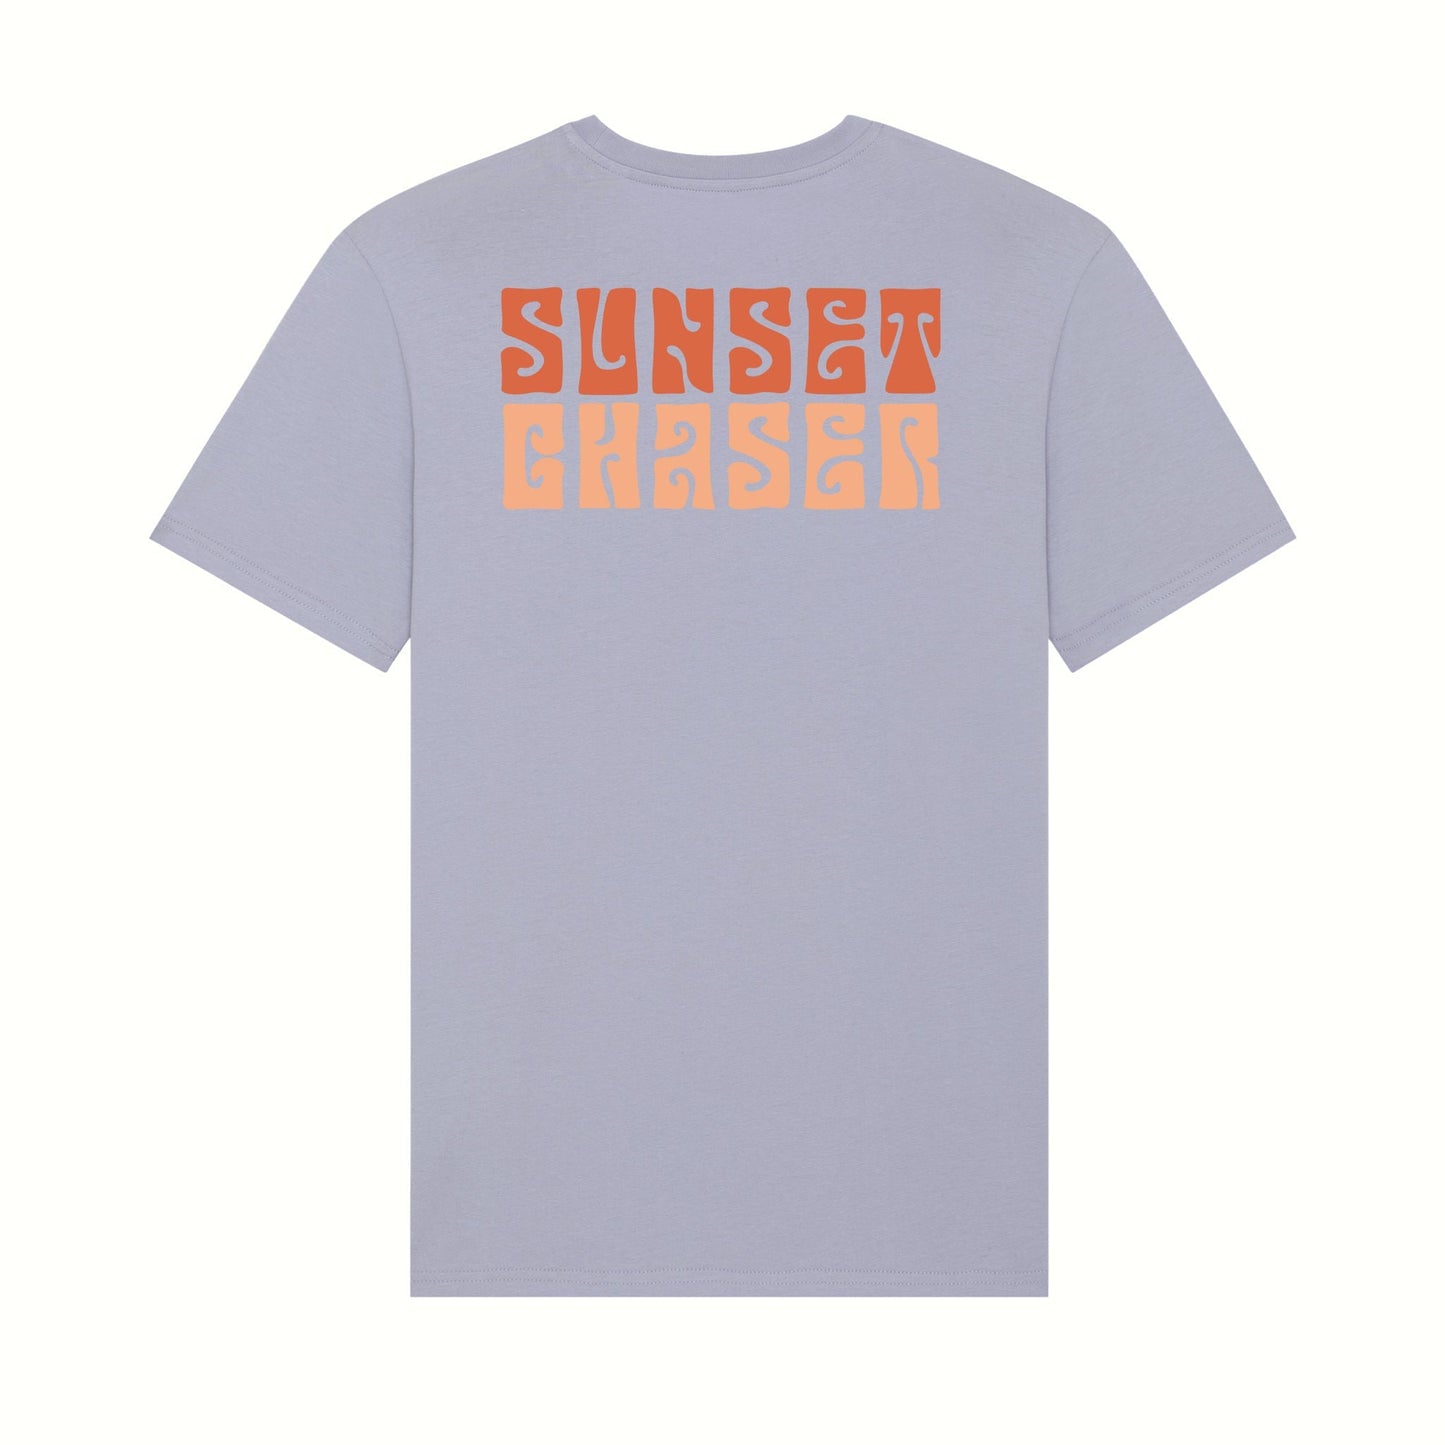 Fear The Ordinary lavender premium organic cotton t-shirt with a Sunset Chaser back print.